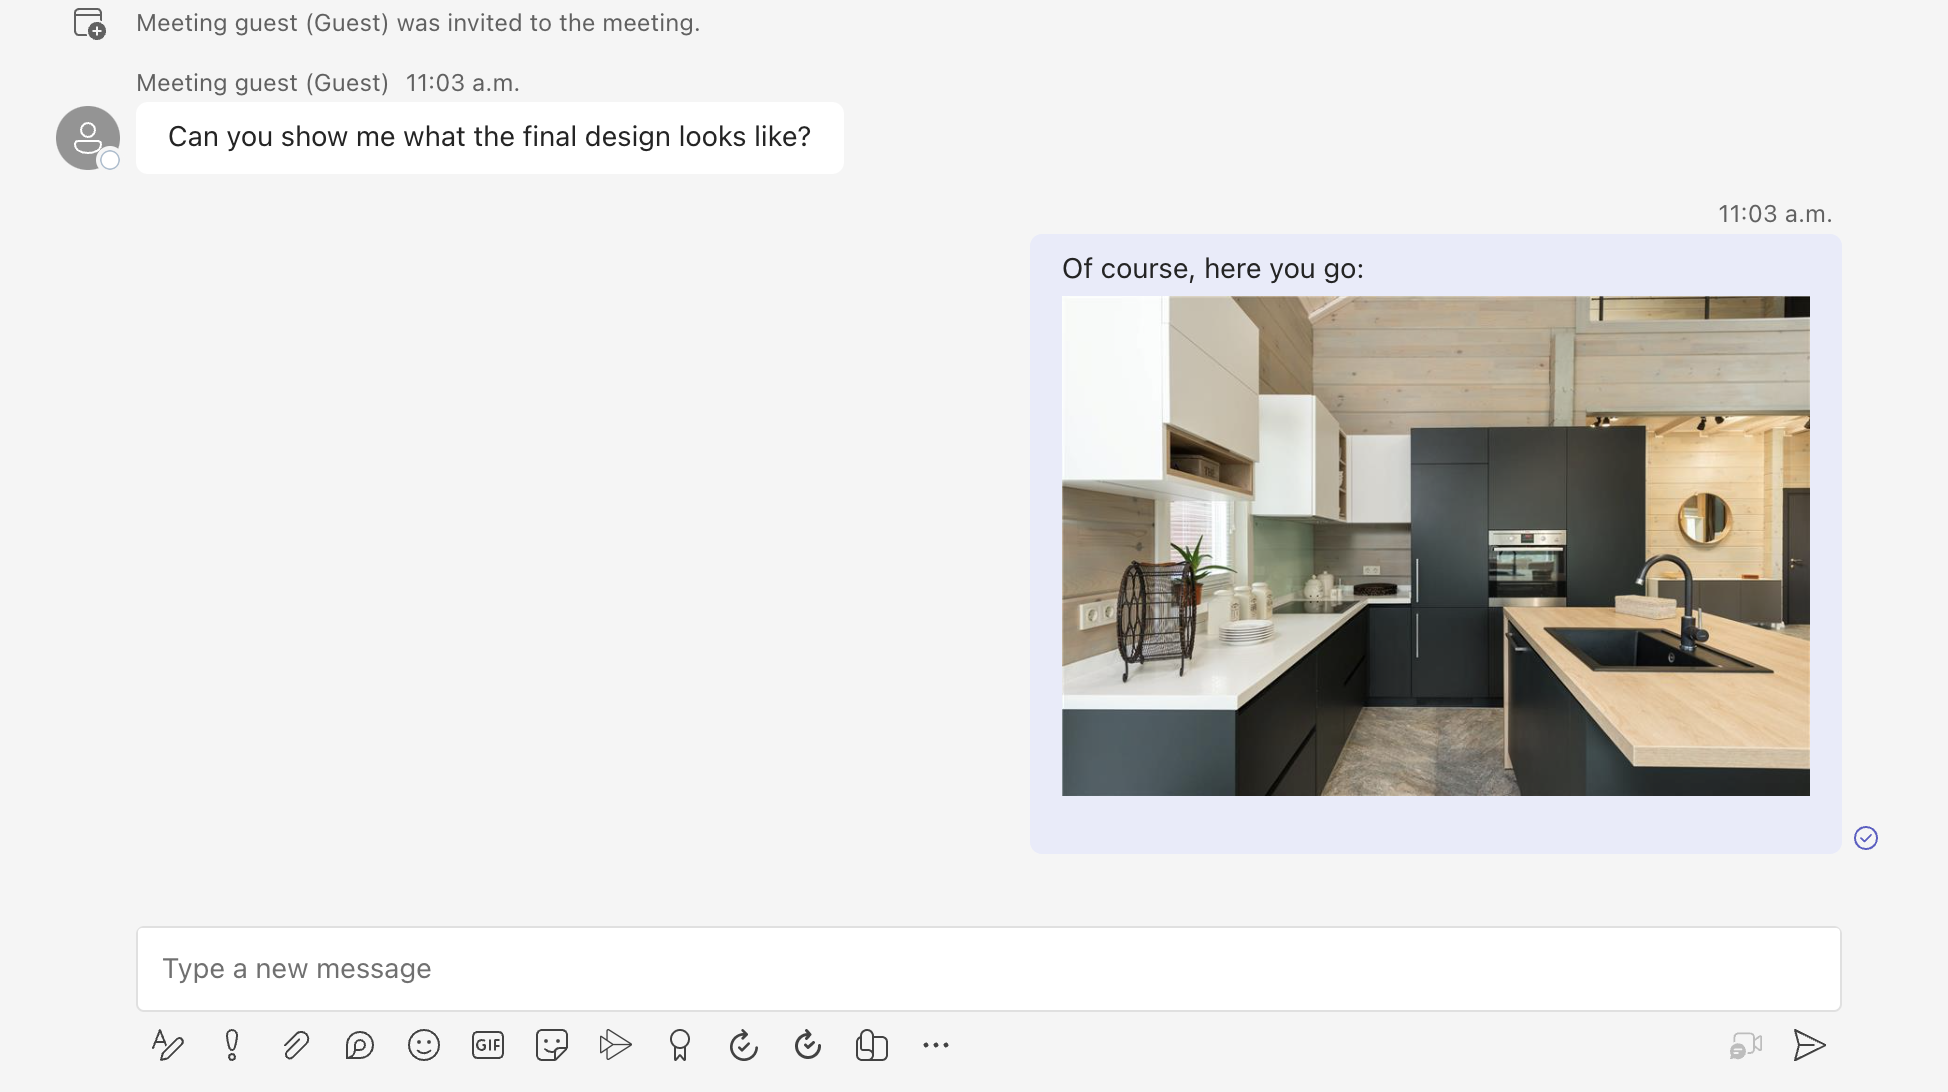 A screenshot of Teams client shown a message with the image attachment sent to the other participant.